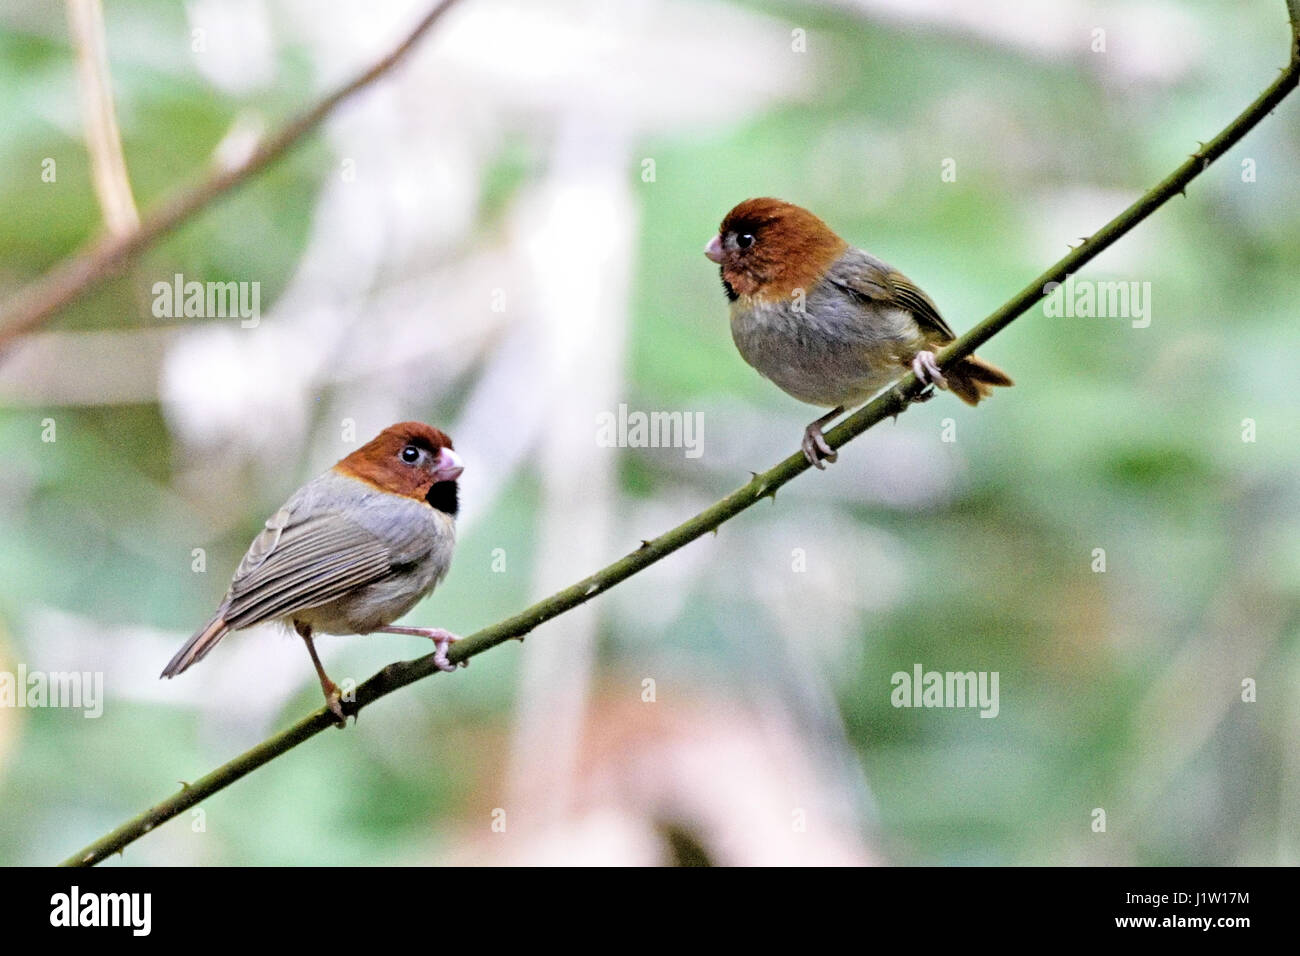 A pair of Short-tailed Parrotbills (Paradoxornis davidianus) perched on a small branch in the forest in North Thailand Stock Photo